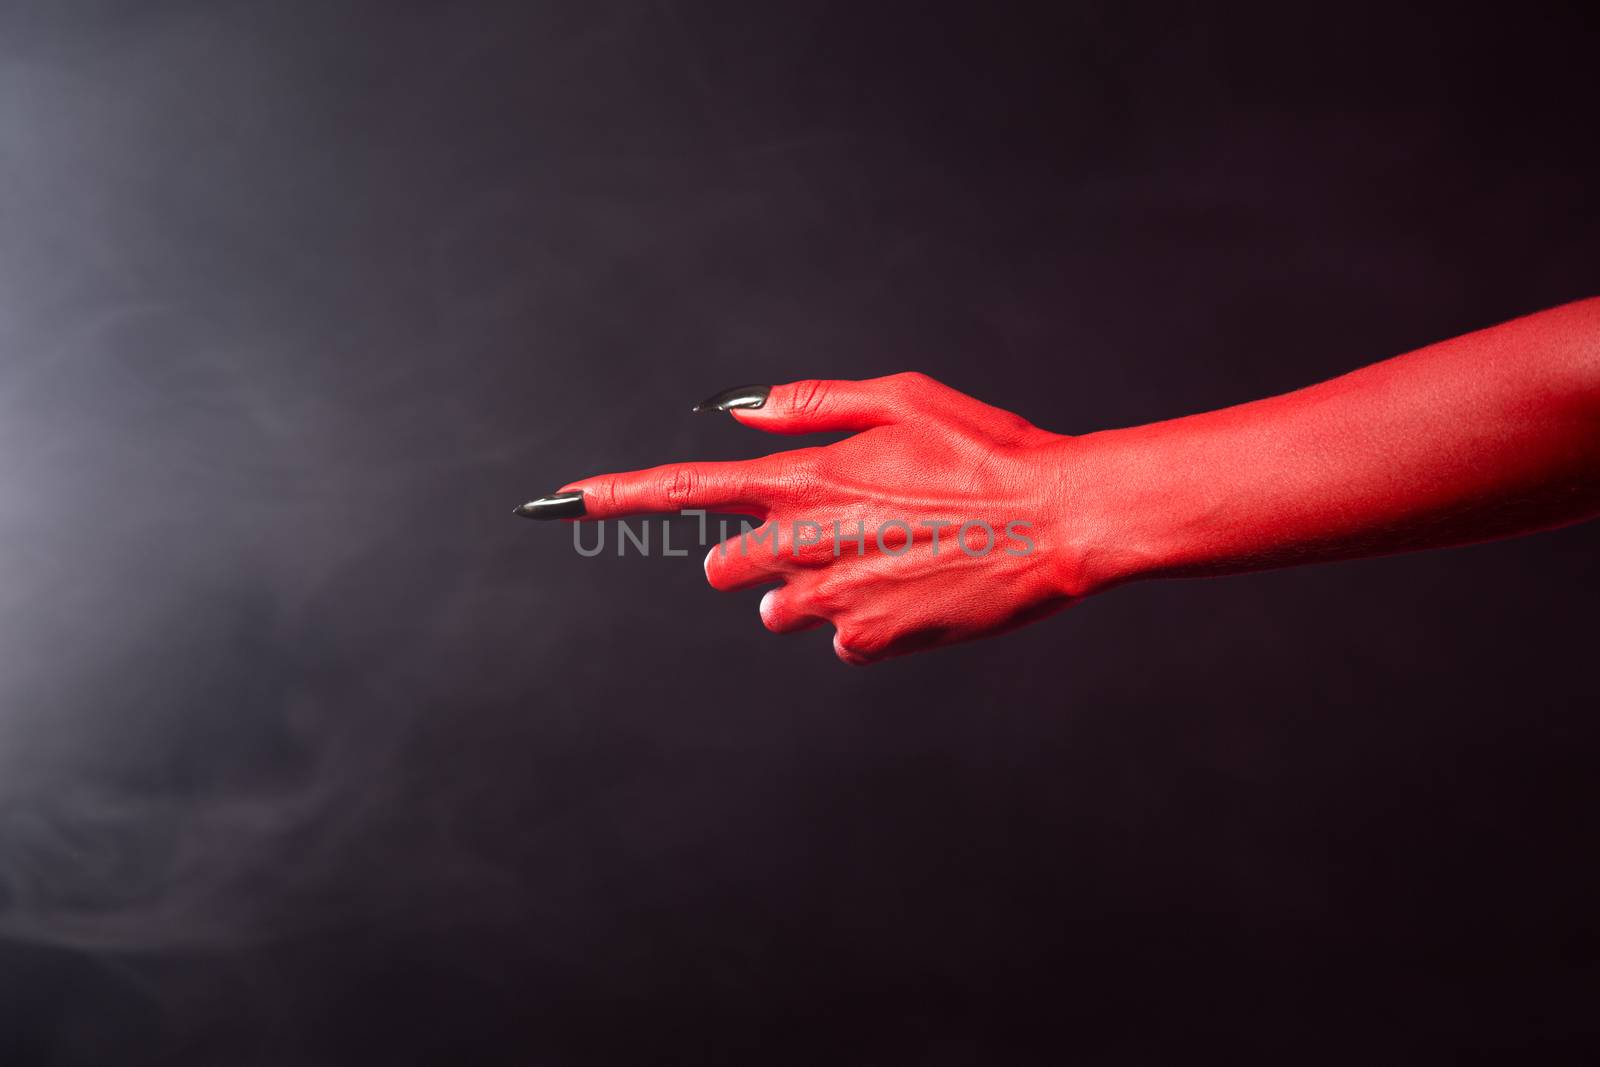 Red devil pointing hand with black sharp nails, extreme body-art, Halloween theme  